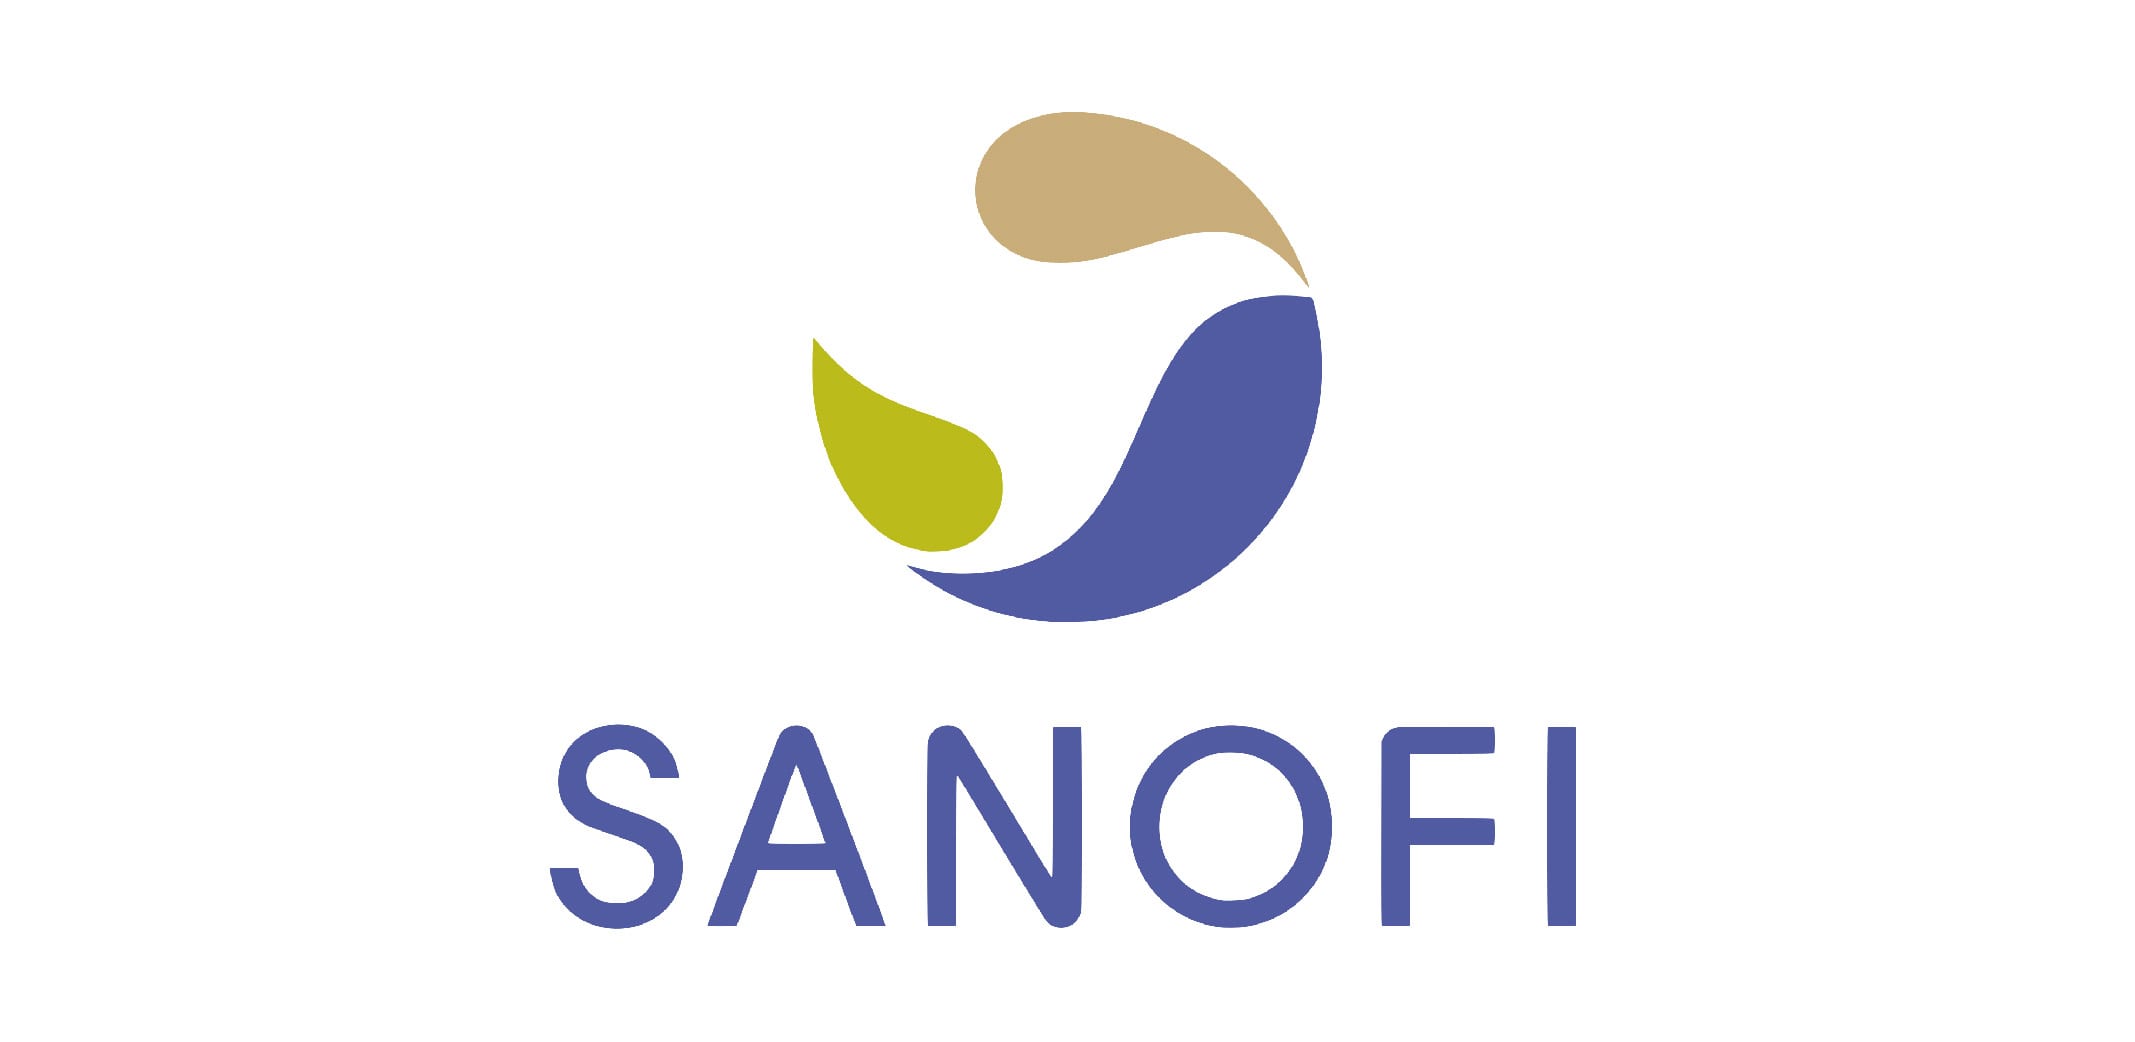 Sanofi wanted to standardize and automate their financial processes with Cadency Journal Entry